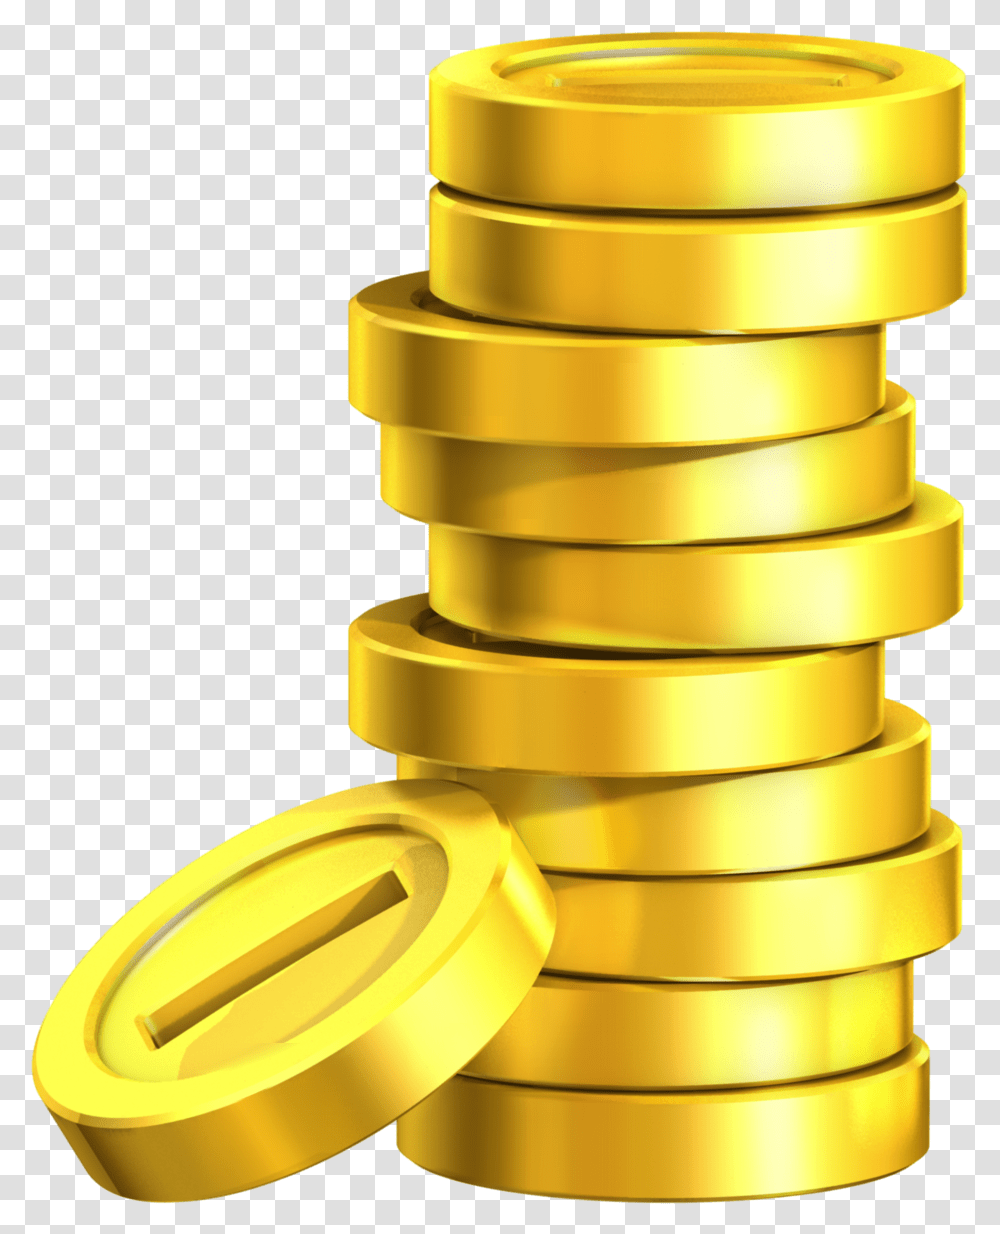 Coins Clipart Stack Coin Mario Pile Of Coins, Gold, Shaker, Bottle, Mixer Transparent Png